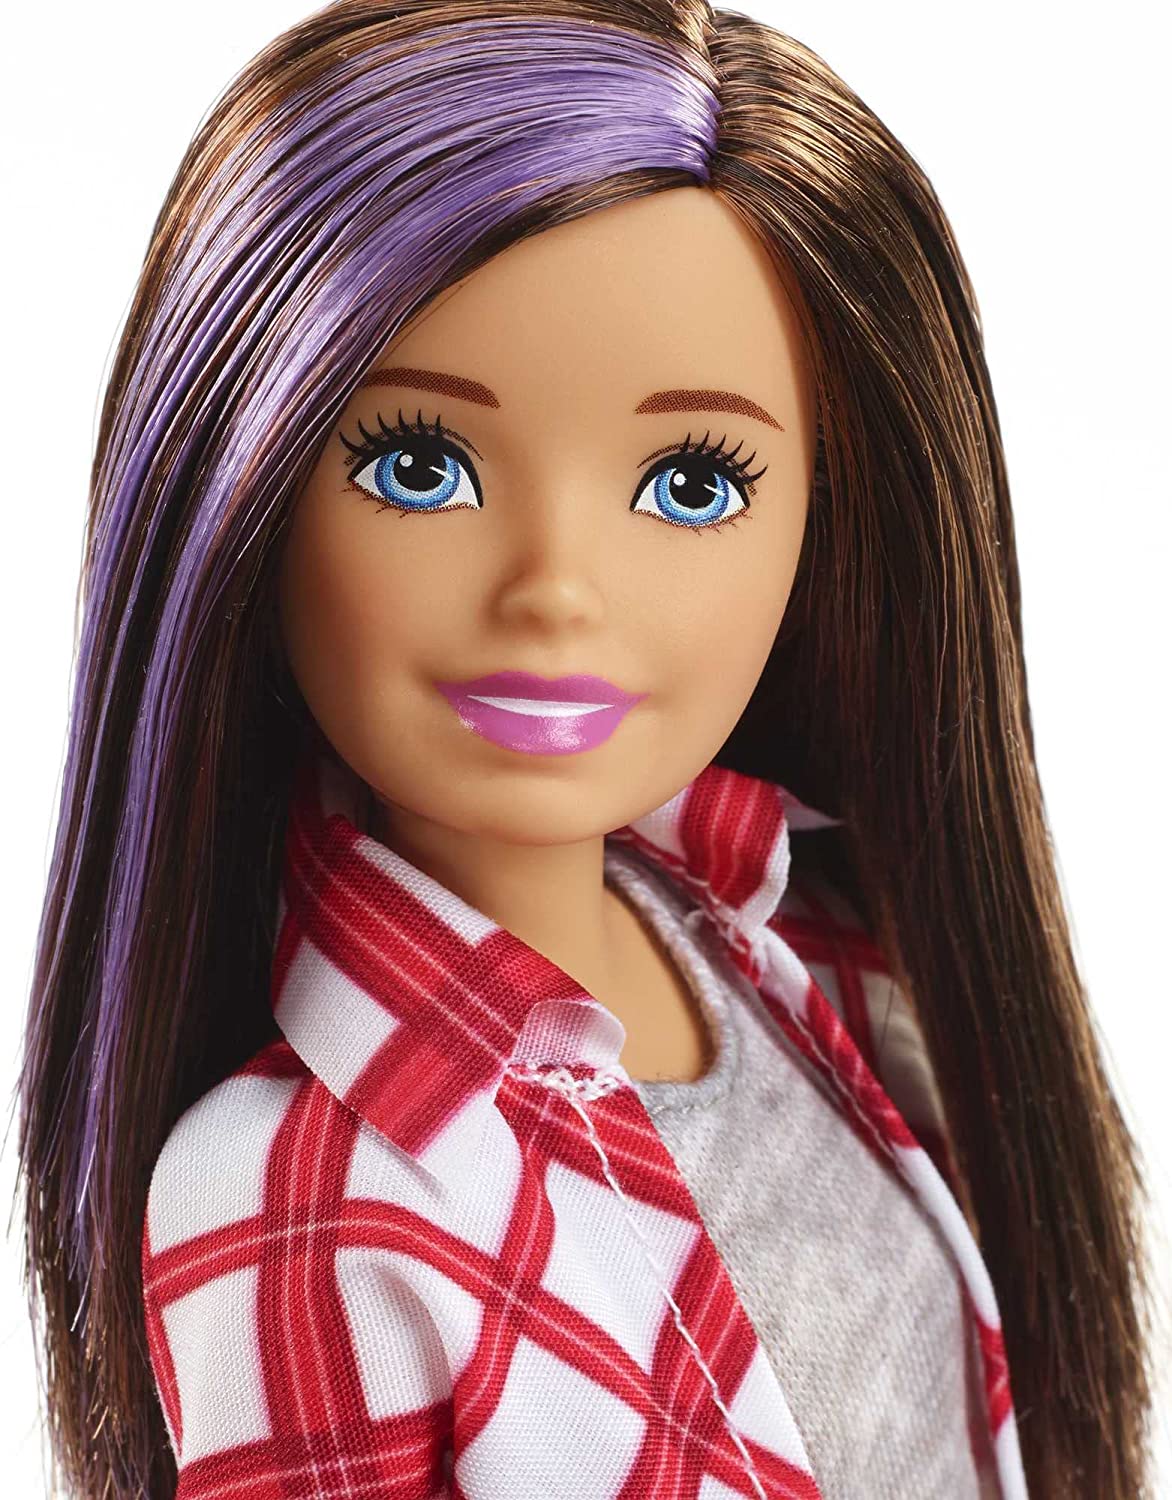 Buy Barbie Dream House Adventure Skipper Doll Online at Low Prices in India